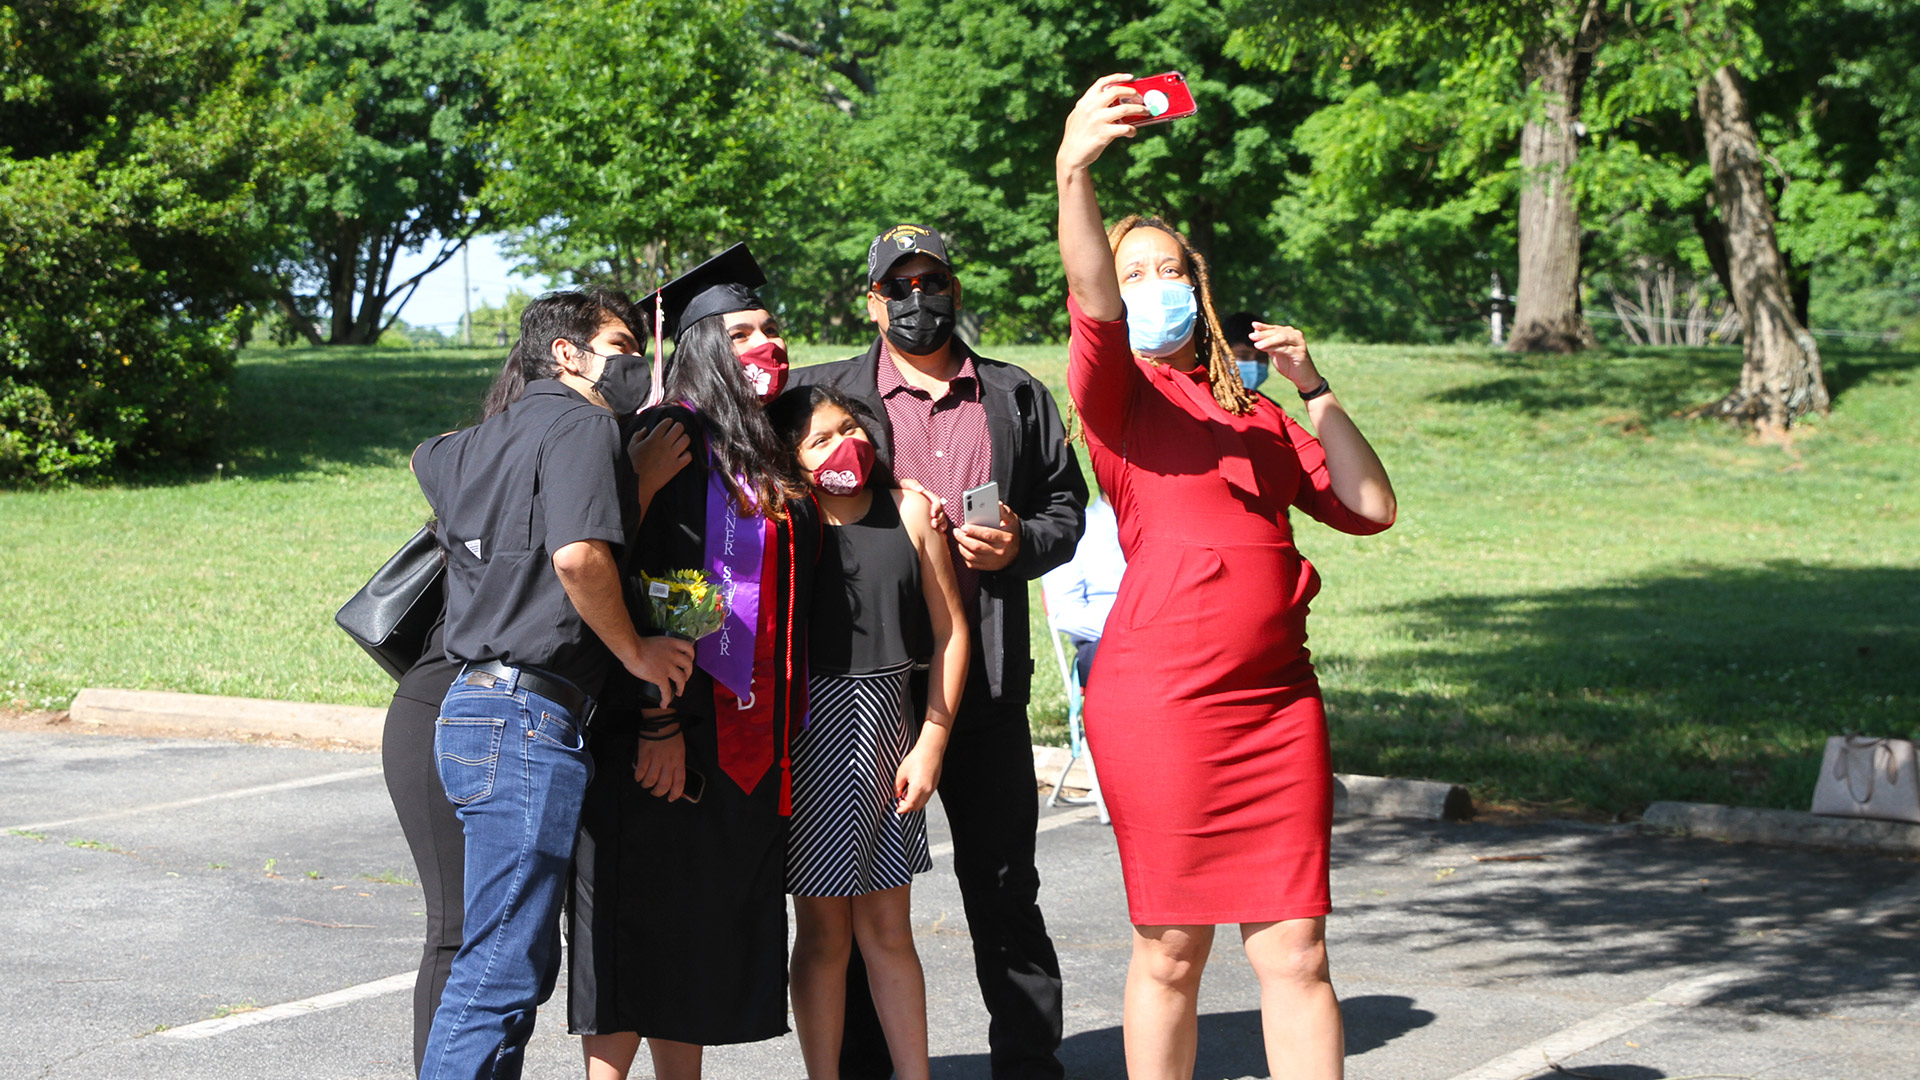 A staff member takes a group selfie with students and graduates at Commencement 2021.